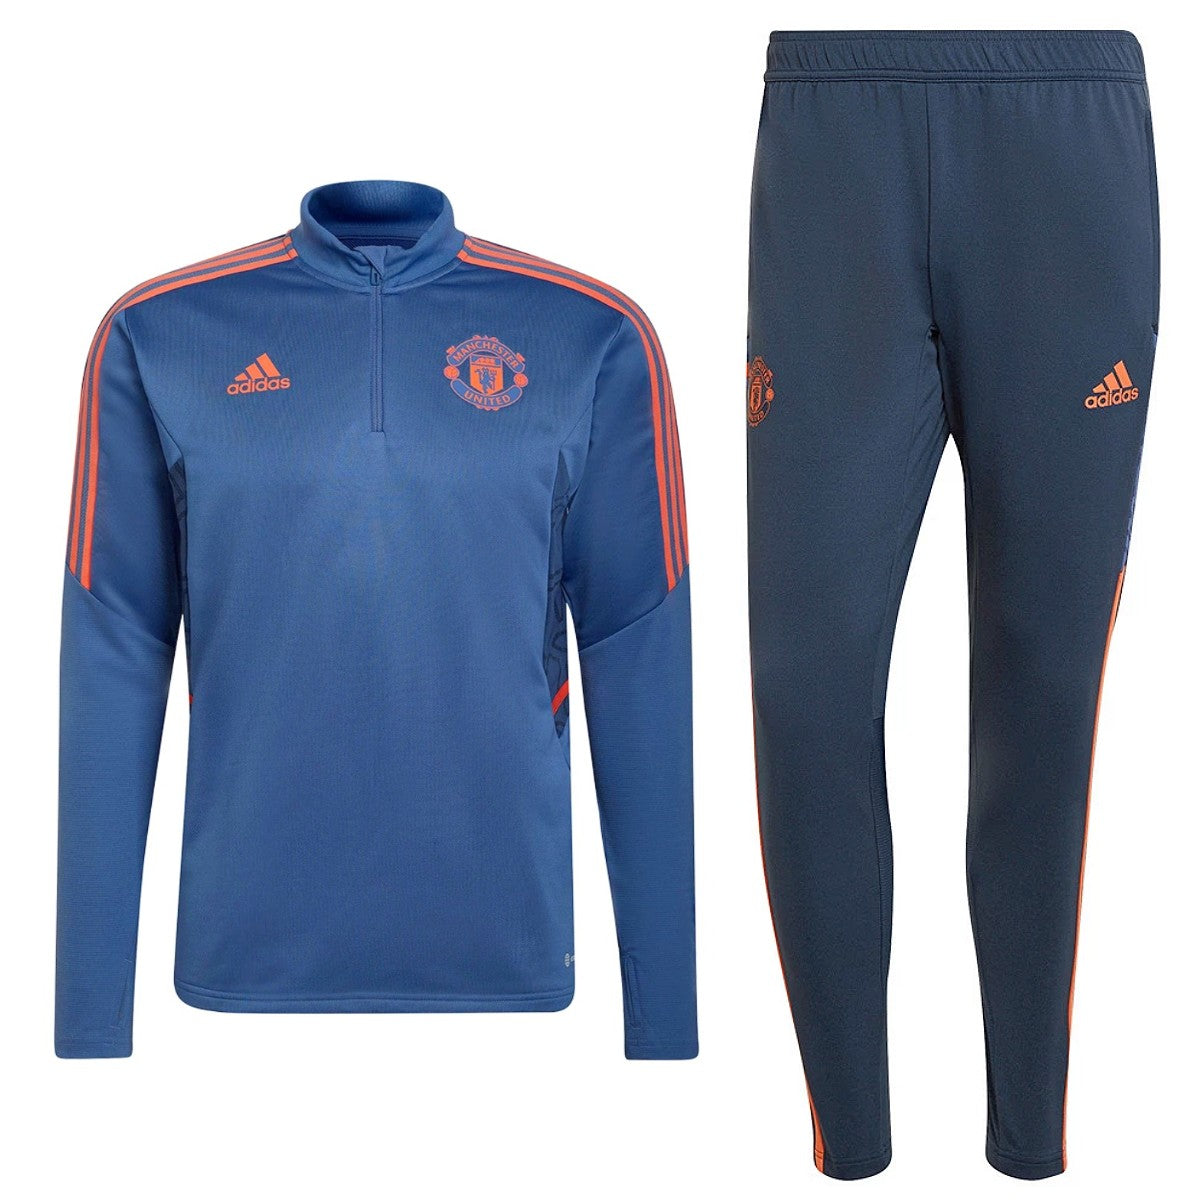 Manchester United training technical soccer tracksuit 2022/23 - Adidas SoccerTracksuits.com